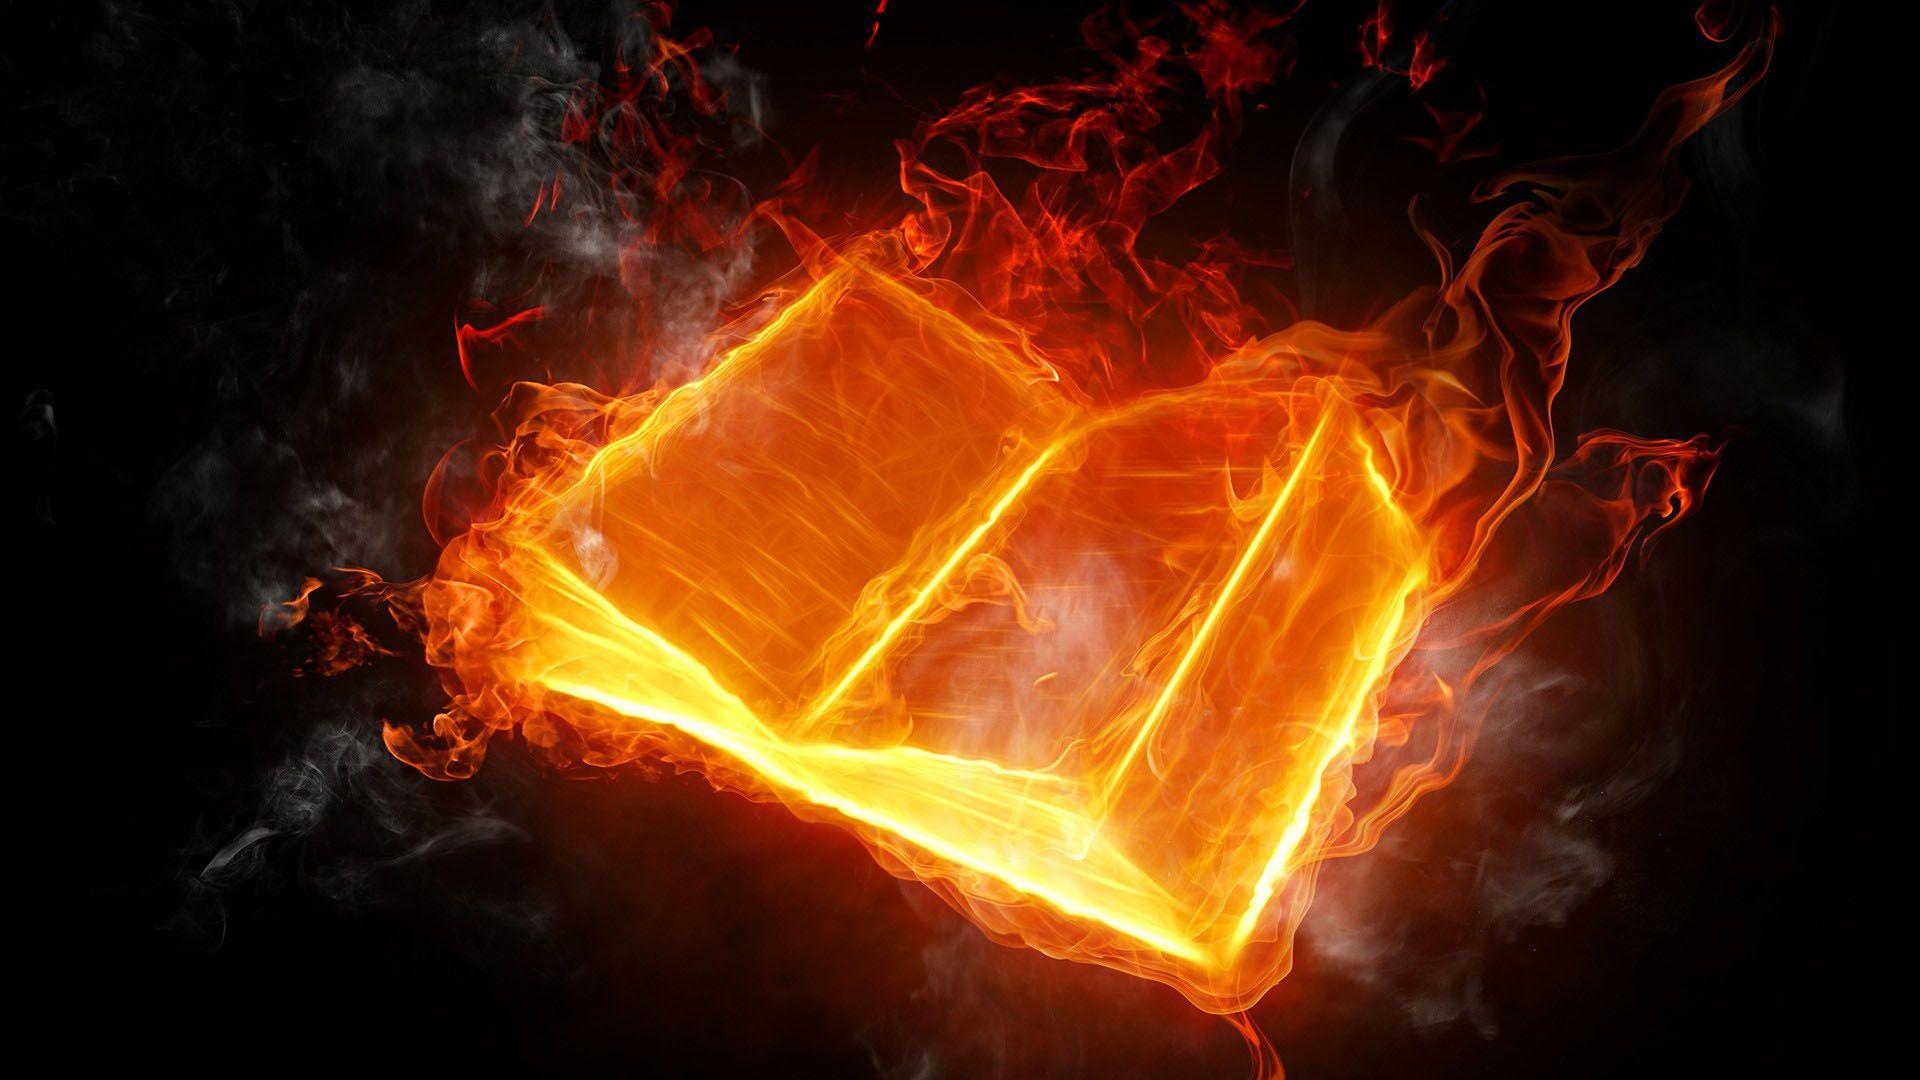 Free 1920x1080 3D Fire Book Image Wallpaper Full HD 1080p Background